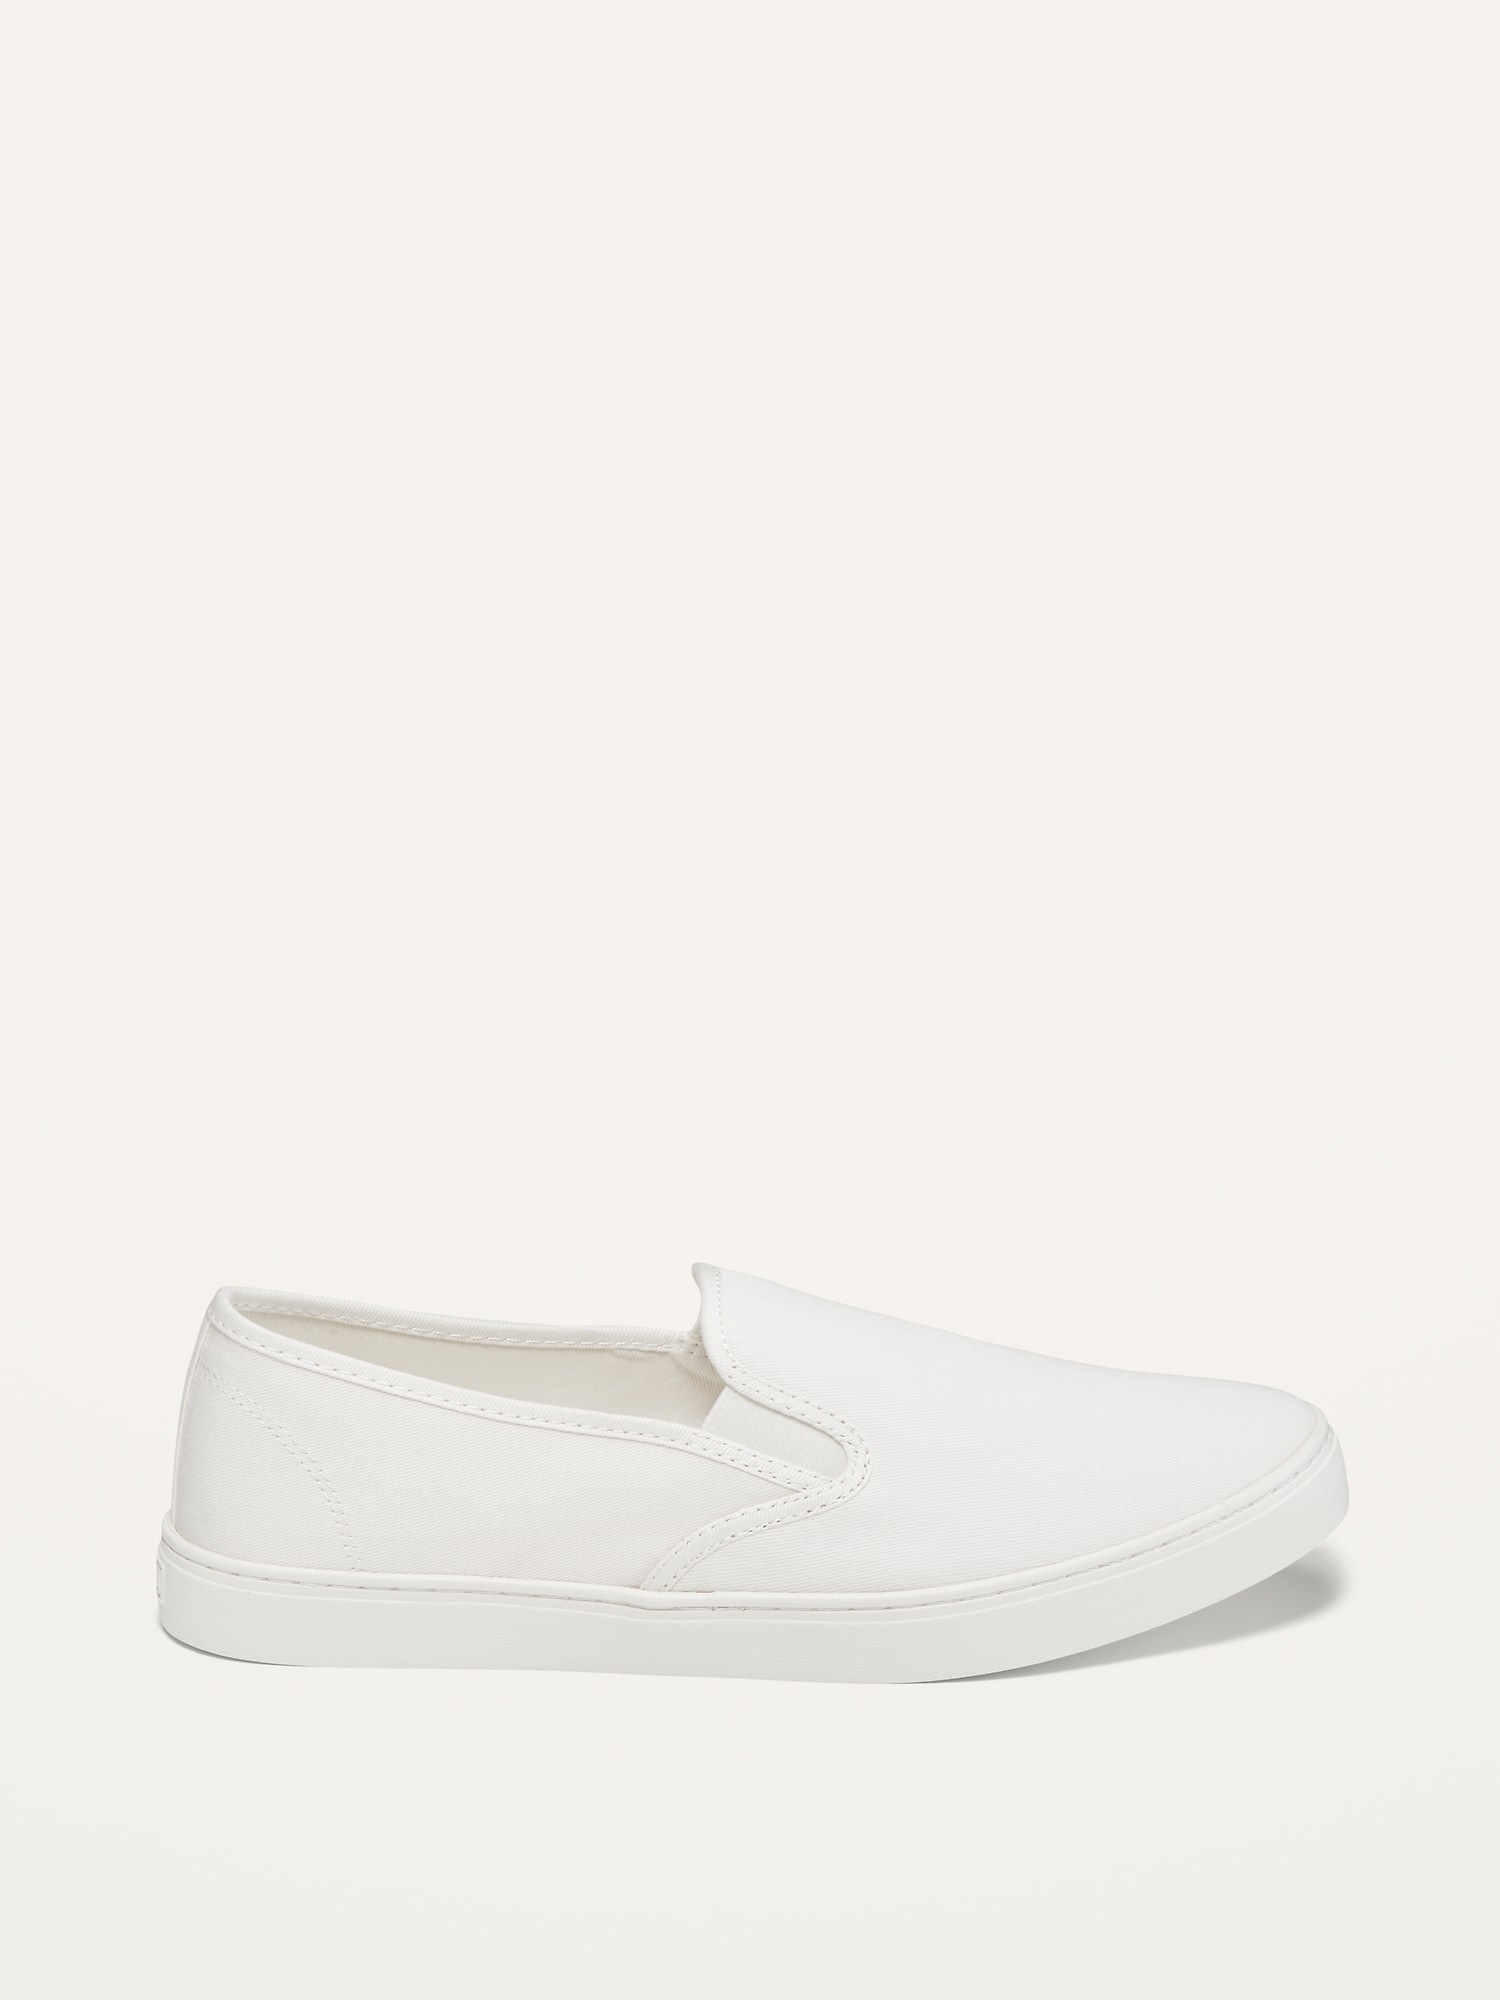 canvas slip on shoes canada